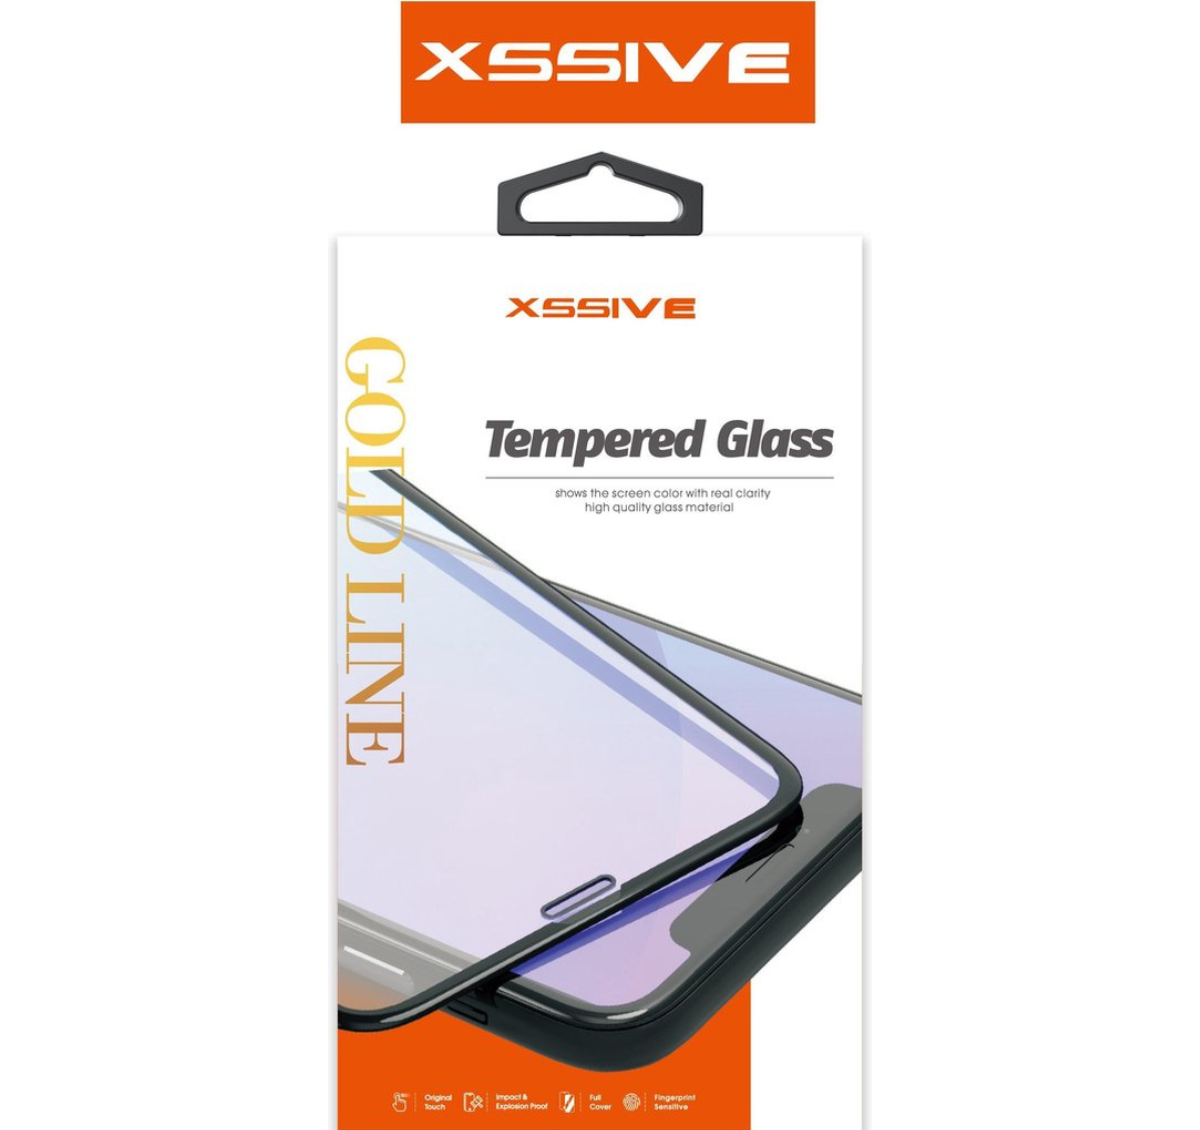 Xssive Screen Protector - Full Cover Glass Film for iPhone 12 - Tempered Glass - Black